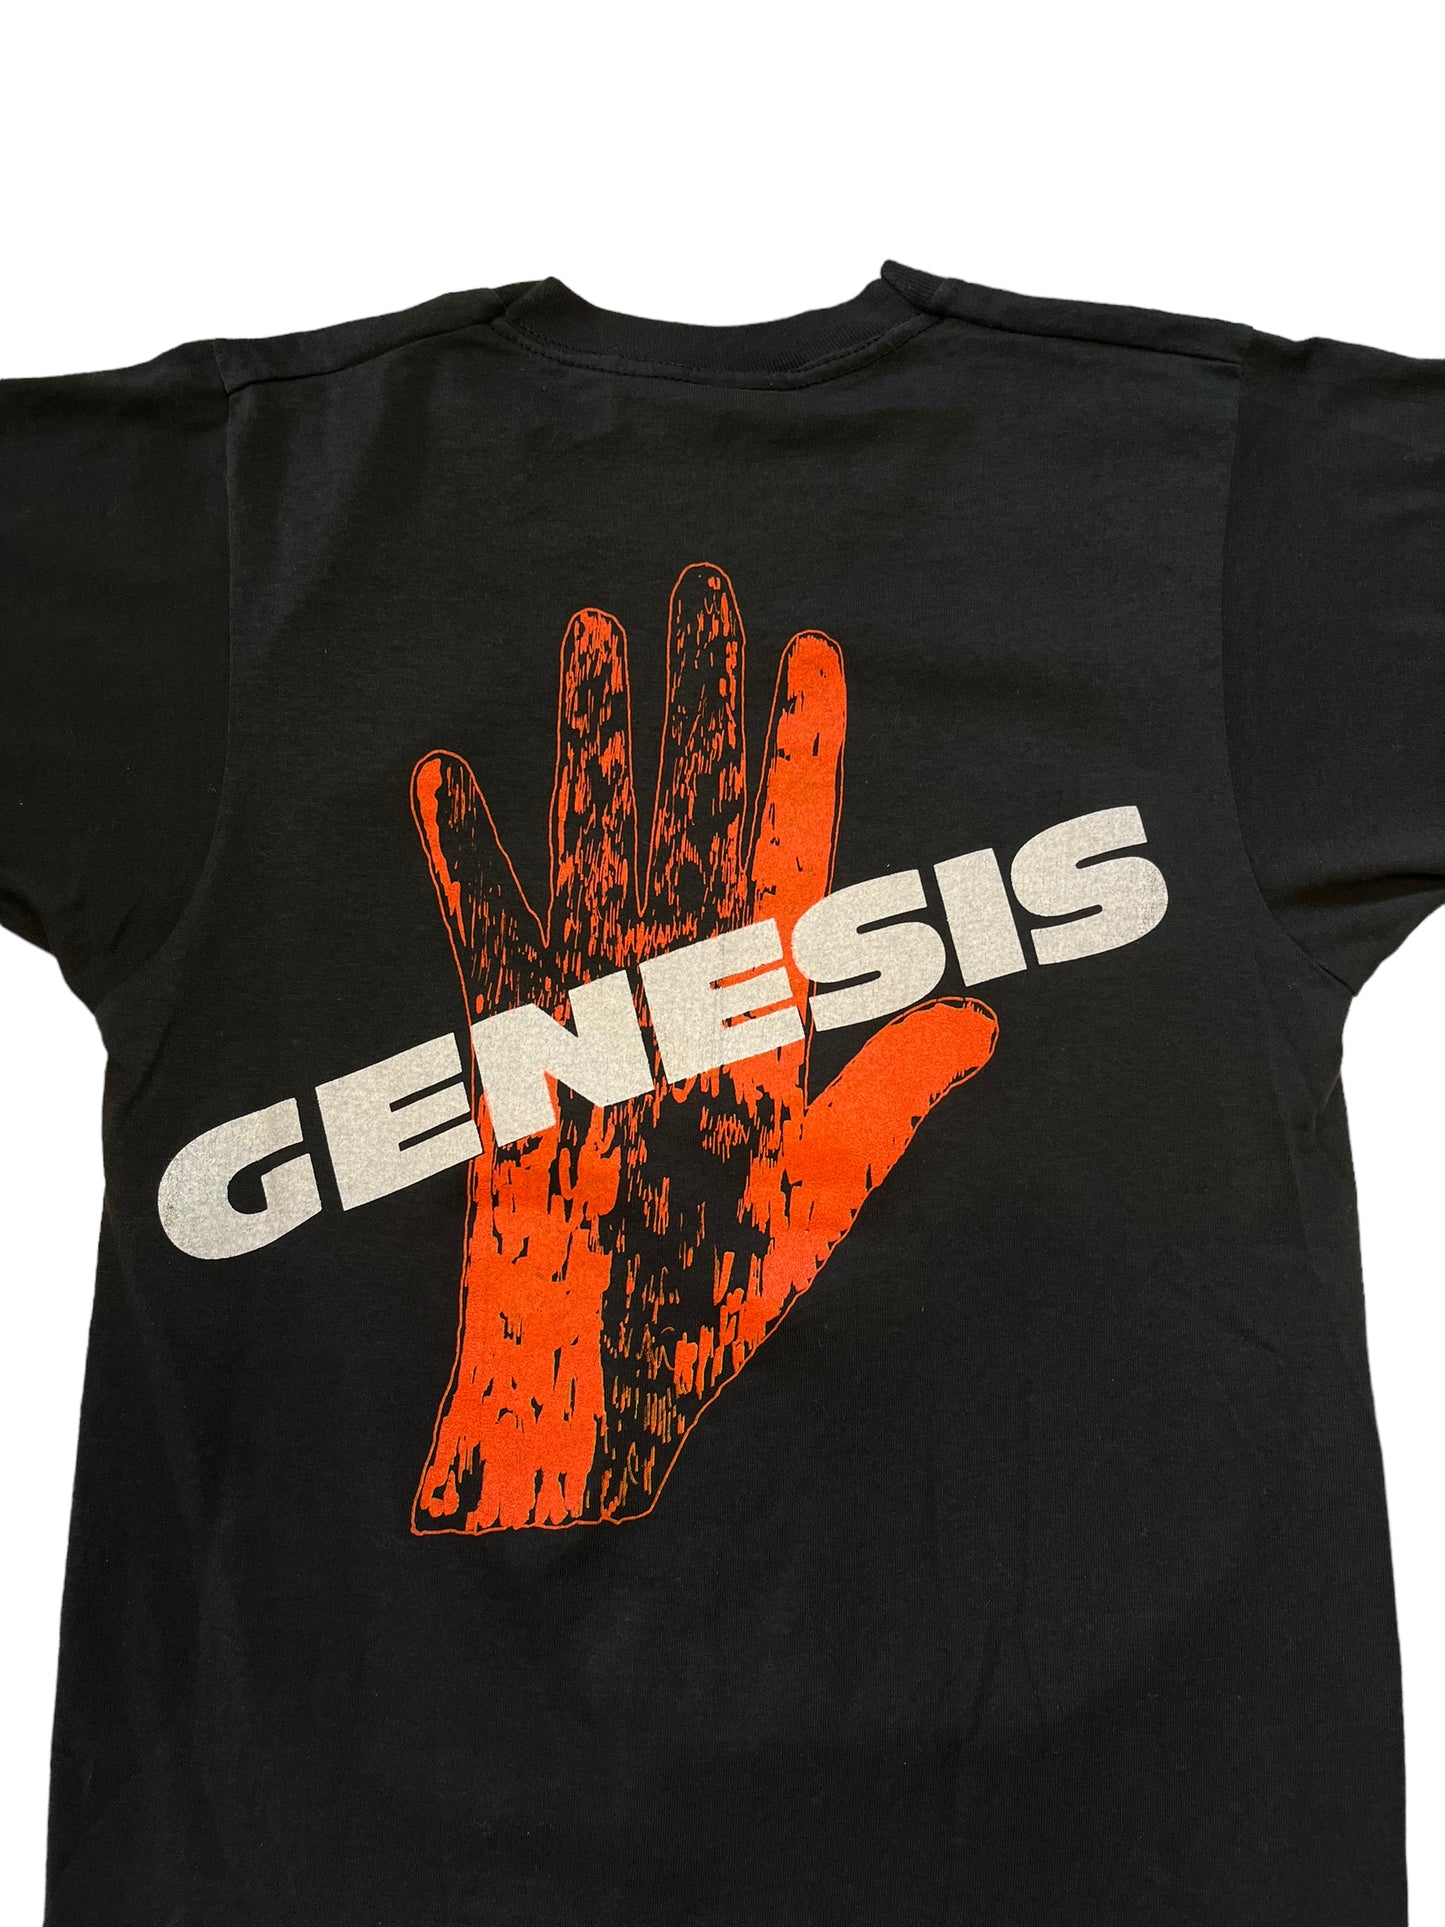 (S/M) Vintage Genesis Double Sided Tour Tee